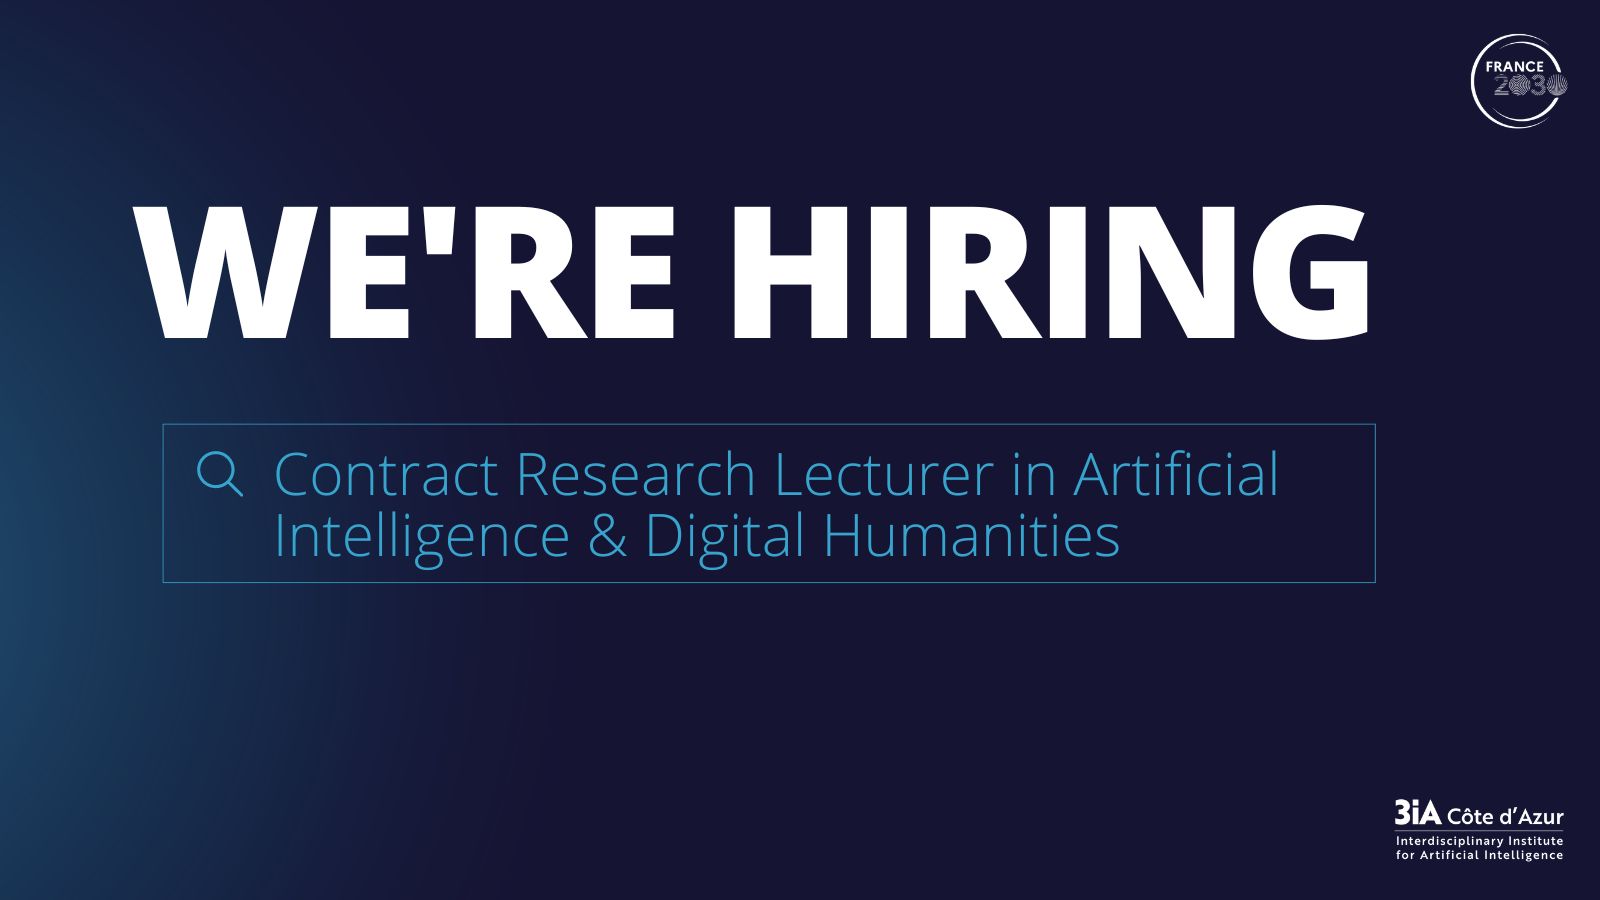 Contract Research Lecturer in Artificial Intelligence & Digital Humanities EFELIA